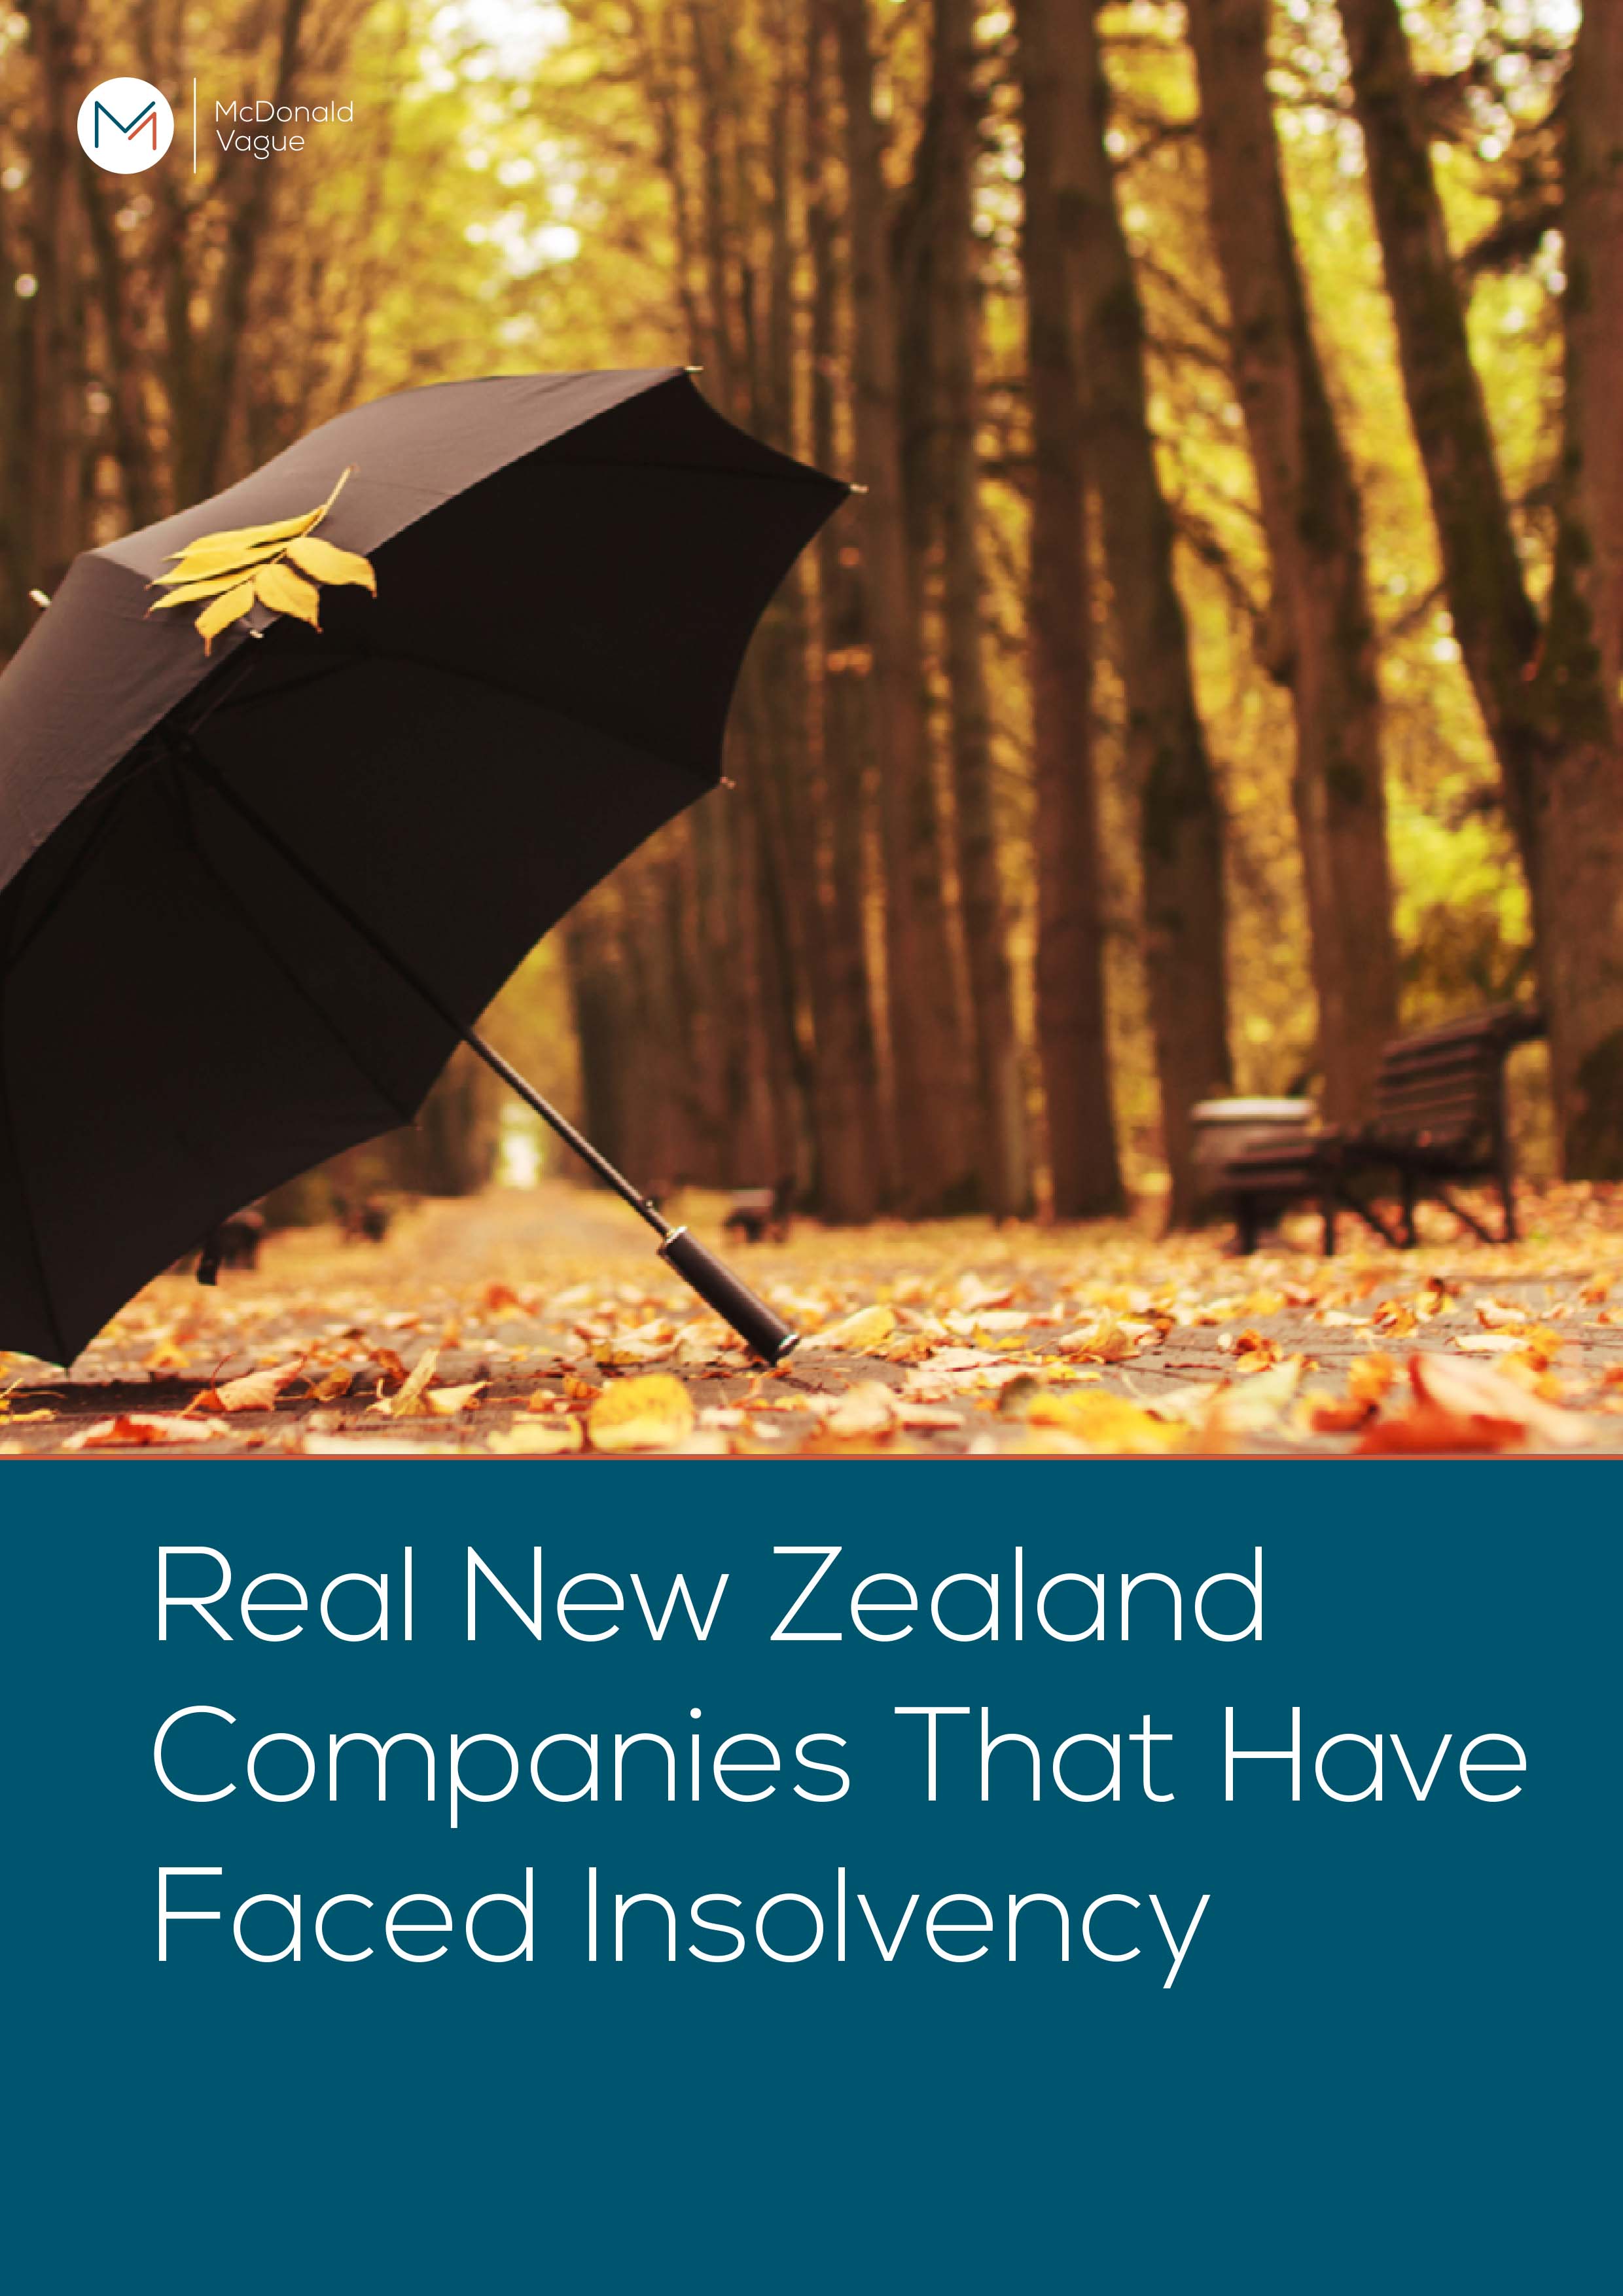 Guide for Real New Zealand Companies That Have Faced Insolvency